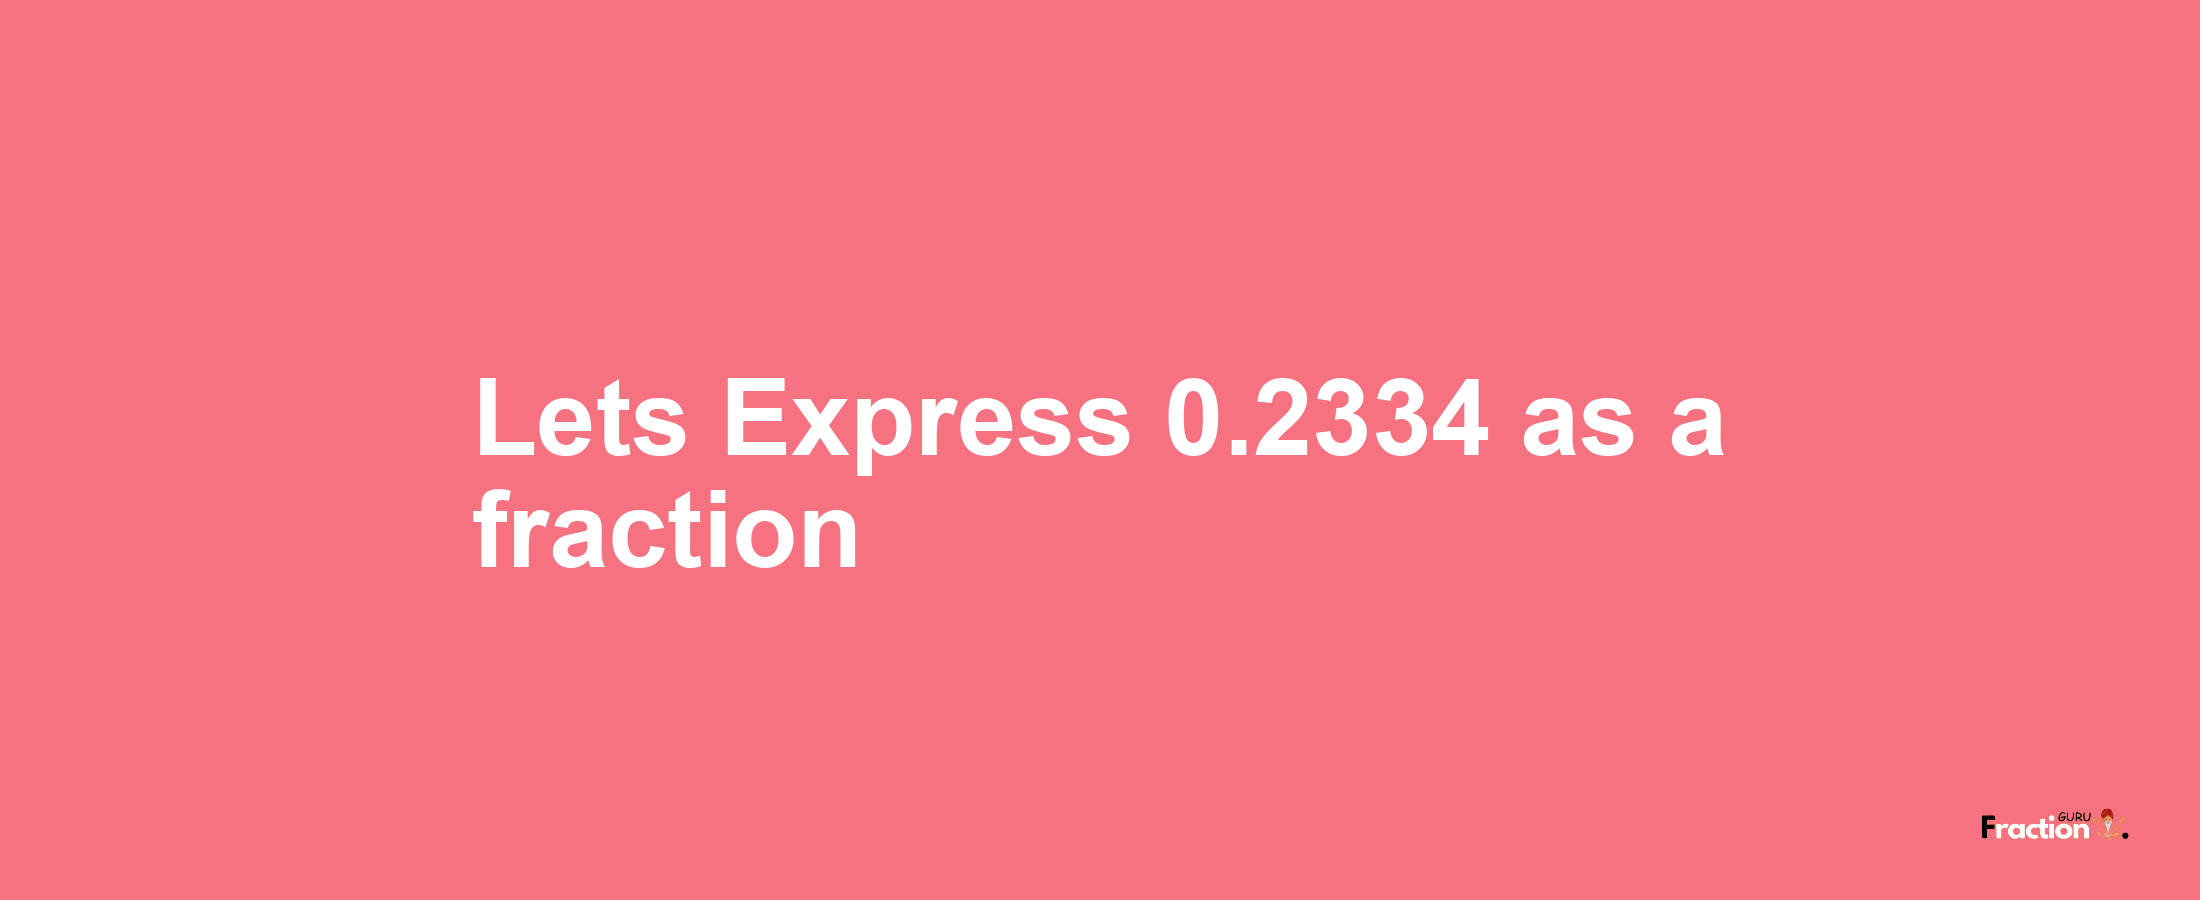 Lets Express 0.2334 as afraction